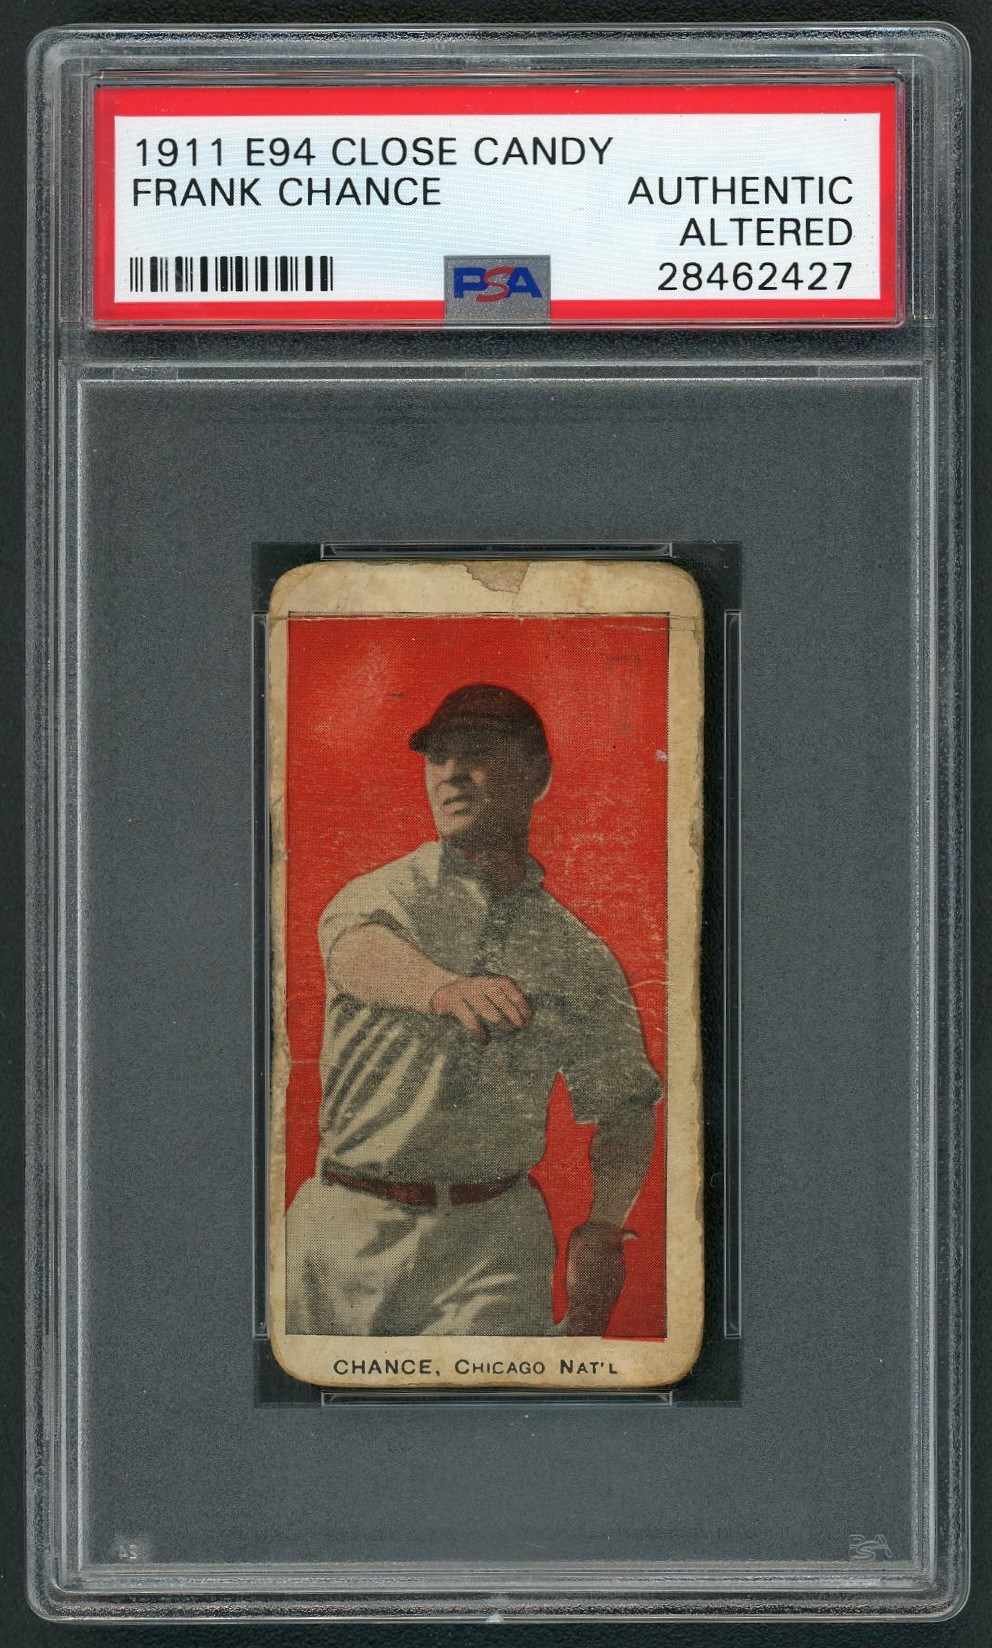 Baseball and Trading Cards - 1911 E94 Close Candy Frank Chance - PSA AUTHENTIC Altered